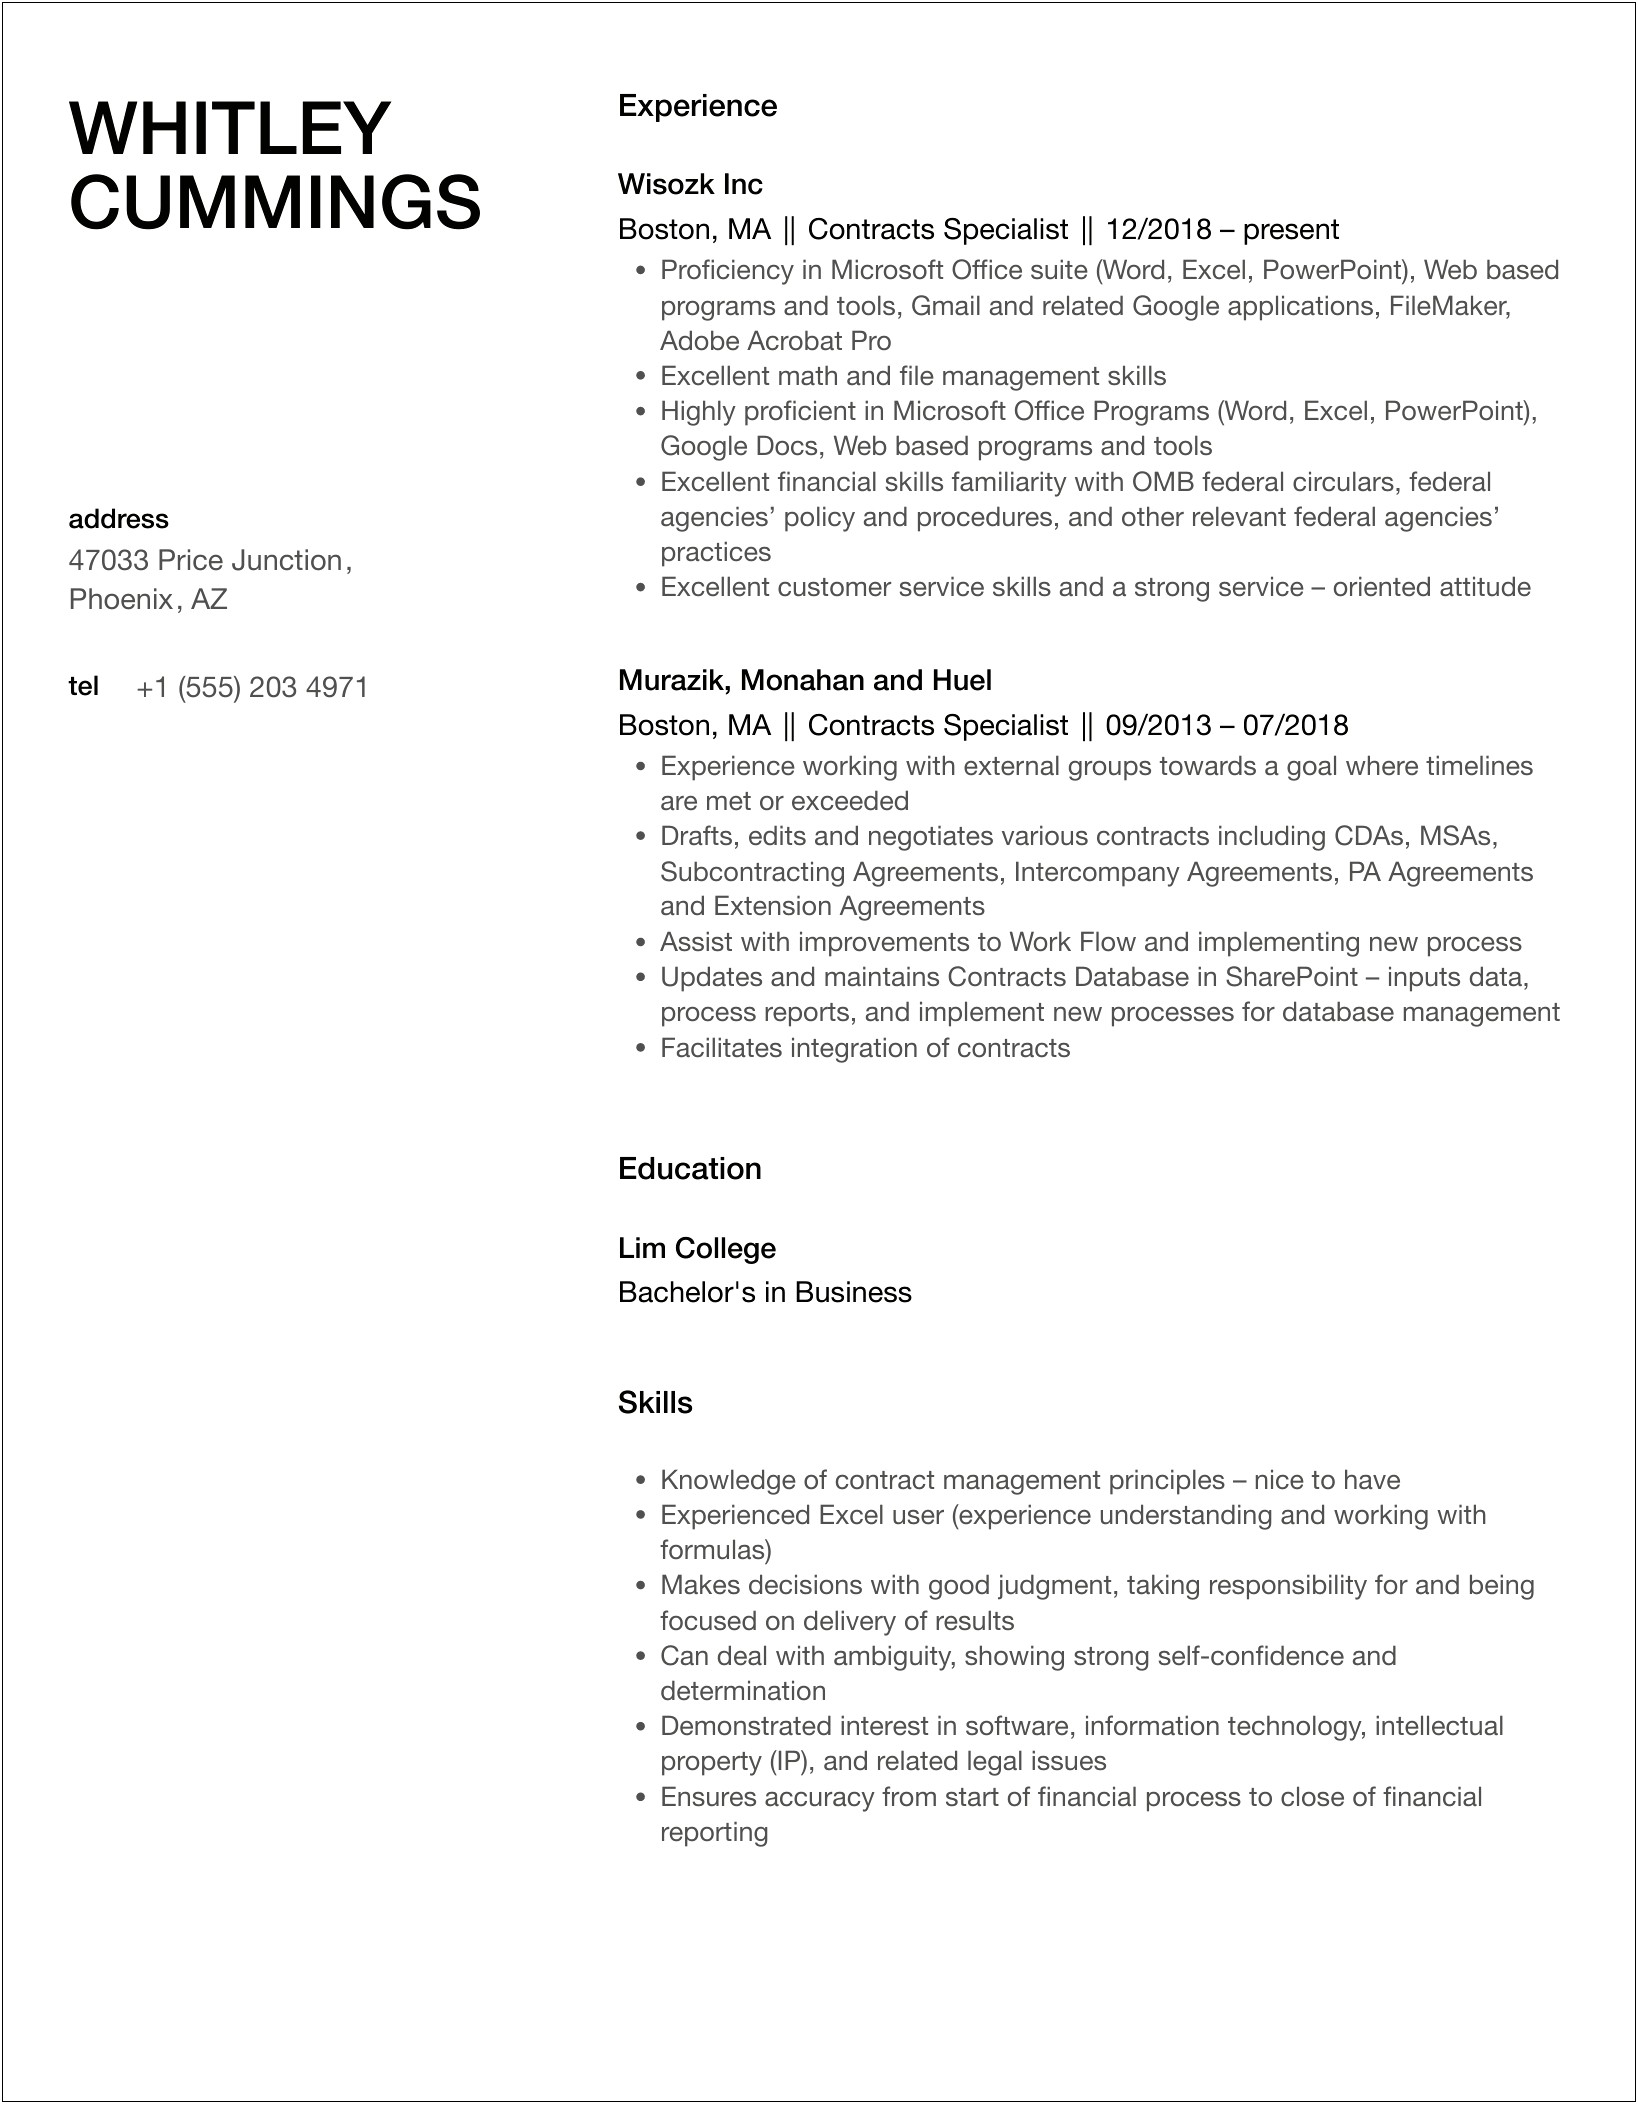 Resume Objective For Legal Contract Specialist